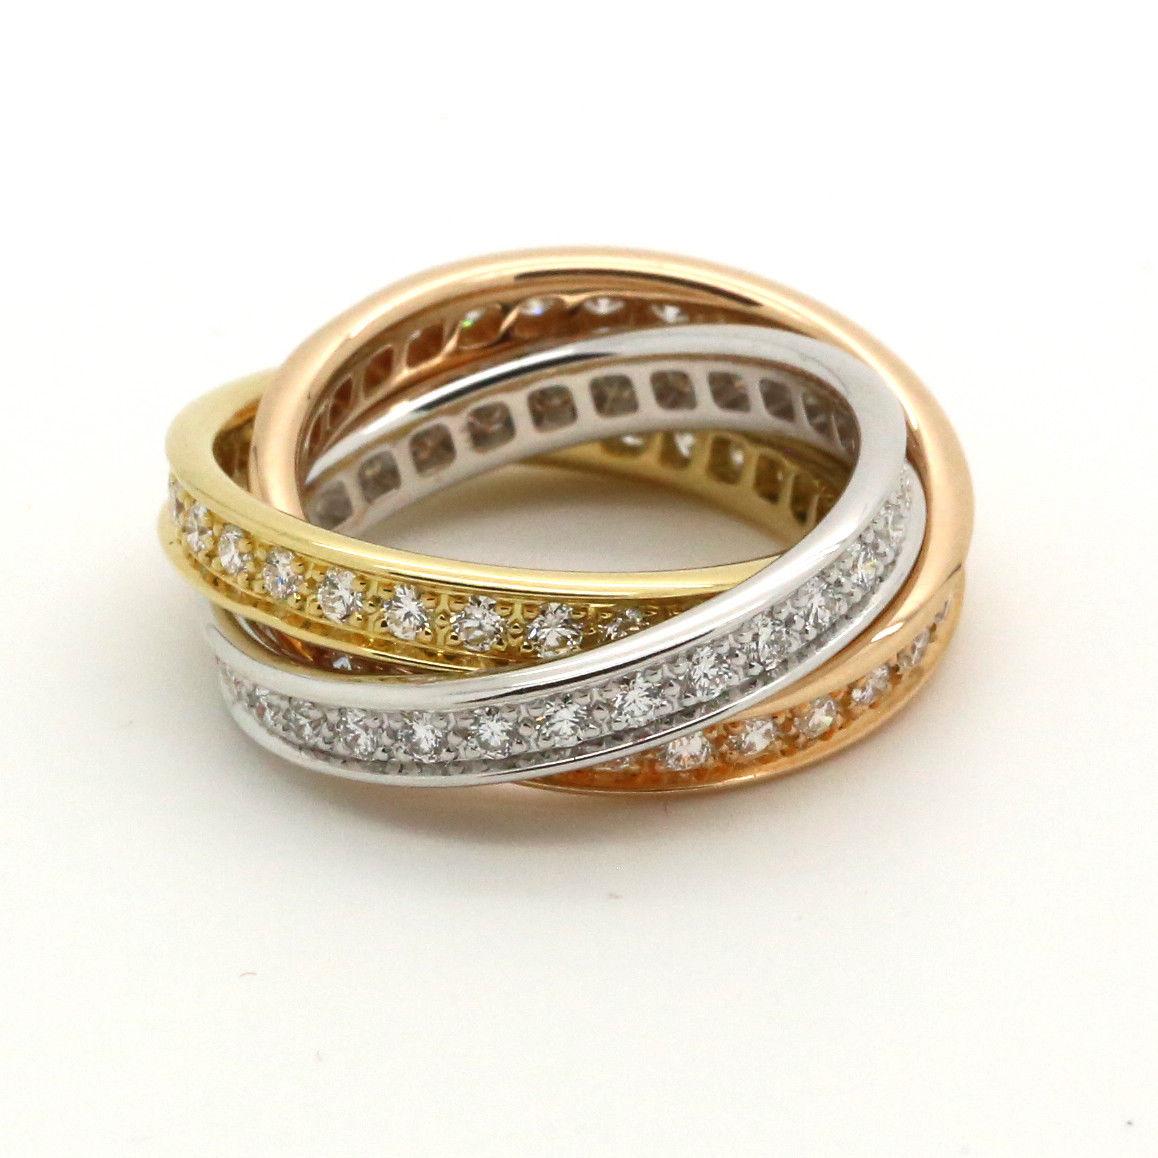 Cartier Trinity Diamond Band Ring in 18k White Yellow & Rose Gold with box.